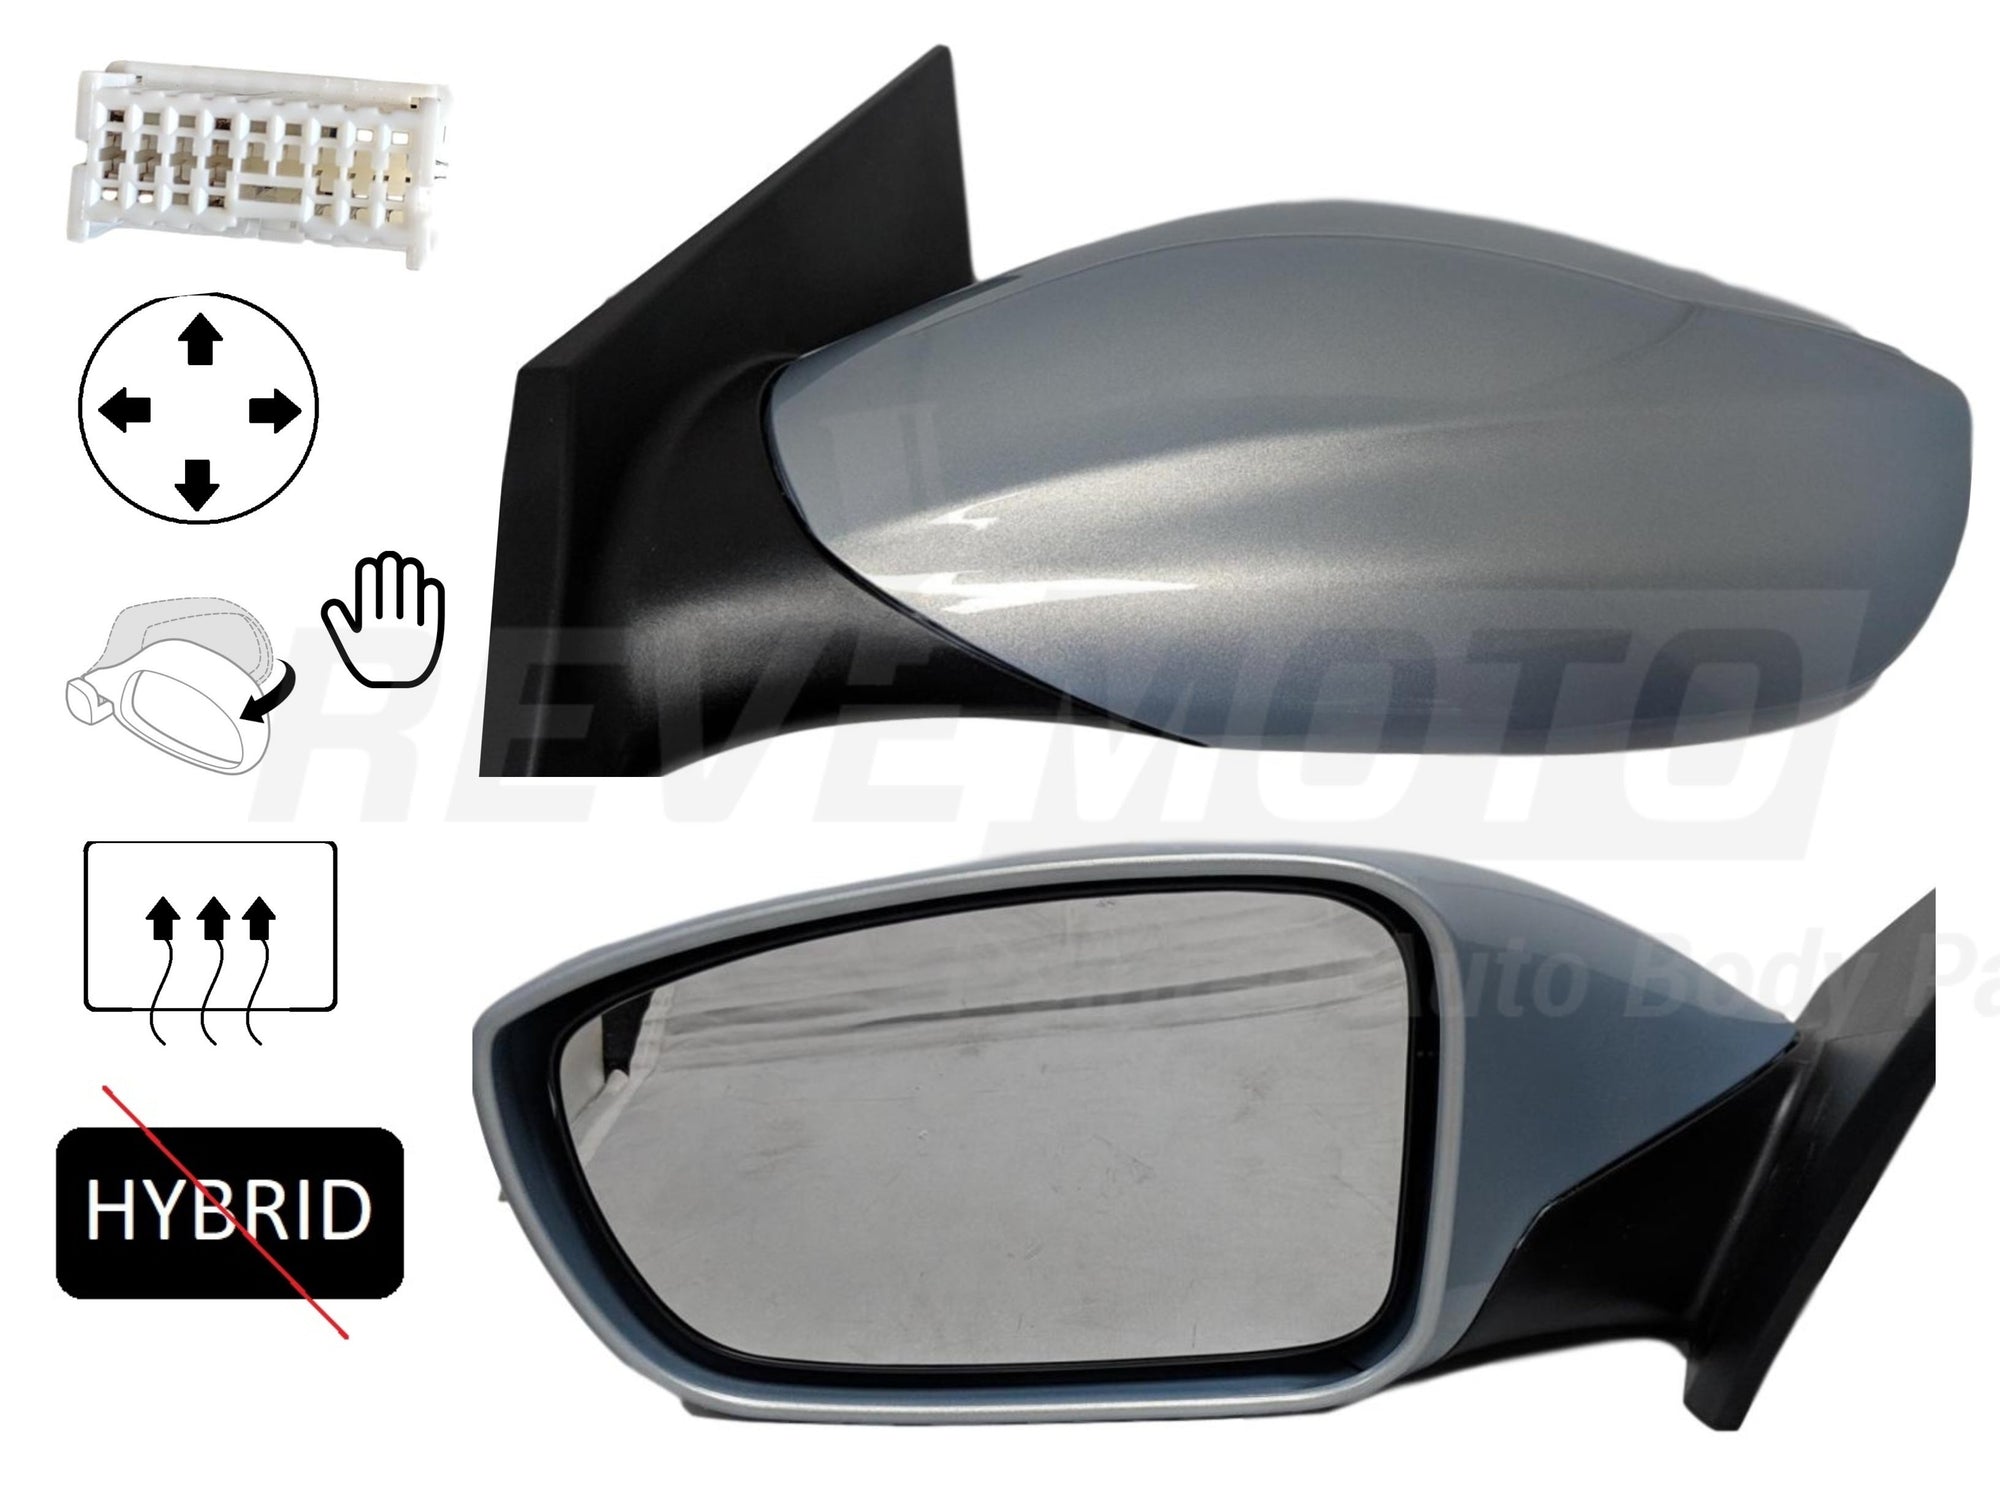 2013_Hyundai_Sonata_Driver_Side_View_Mirror_Heated_wo_Turn_Signal_Light_Power_Manual_Folding_Except_Hybrid_Painted_Iridescent_Silver_Blue_Pearl_Z3__876103Q010